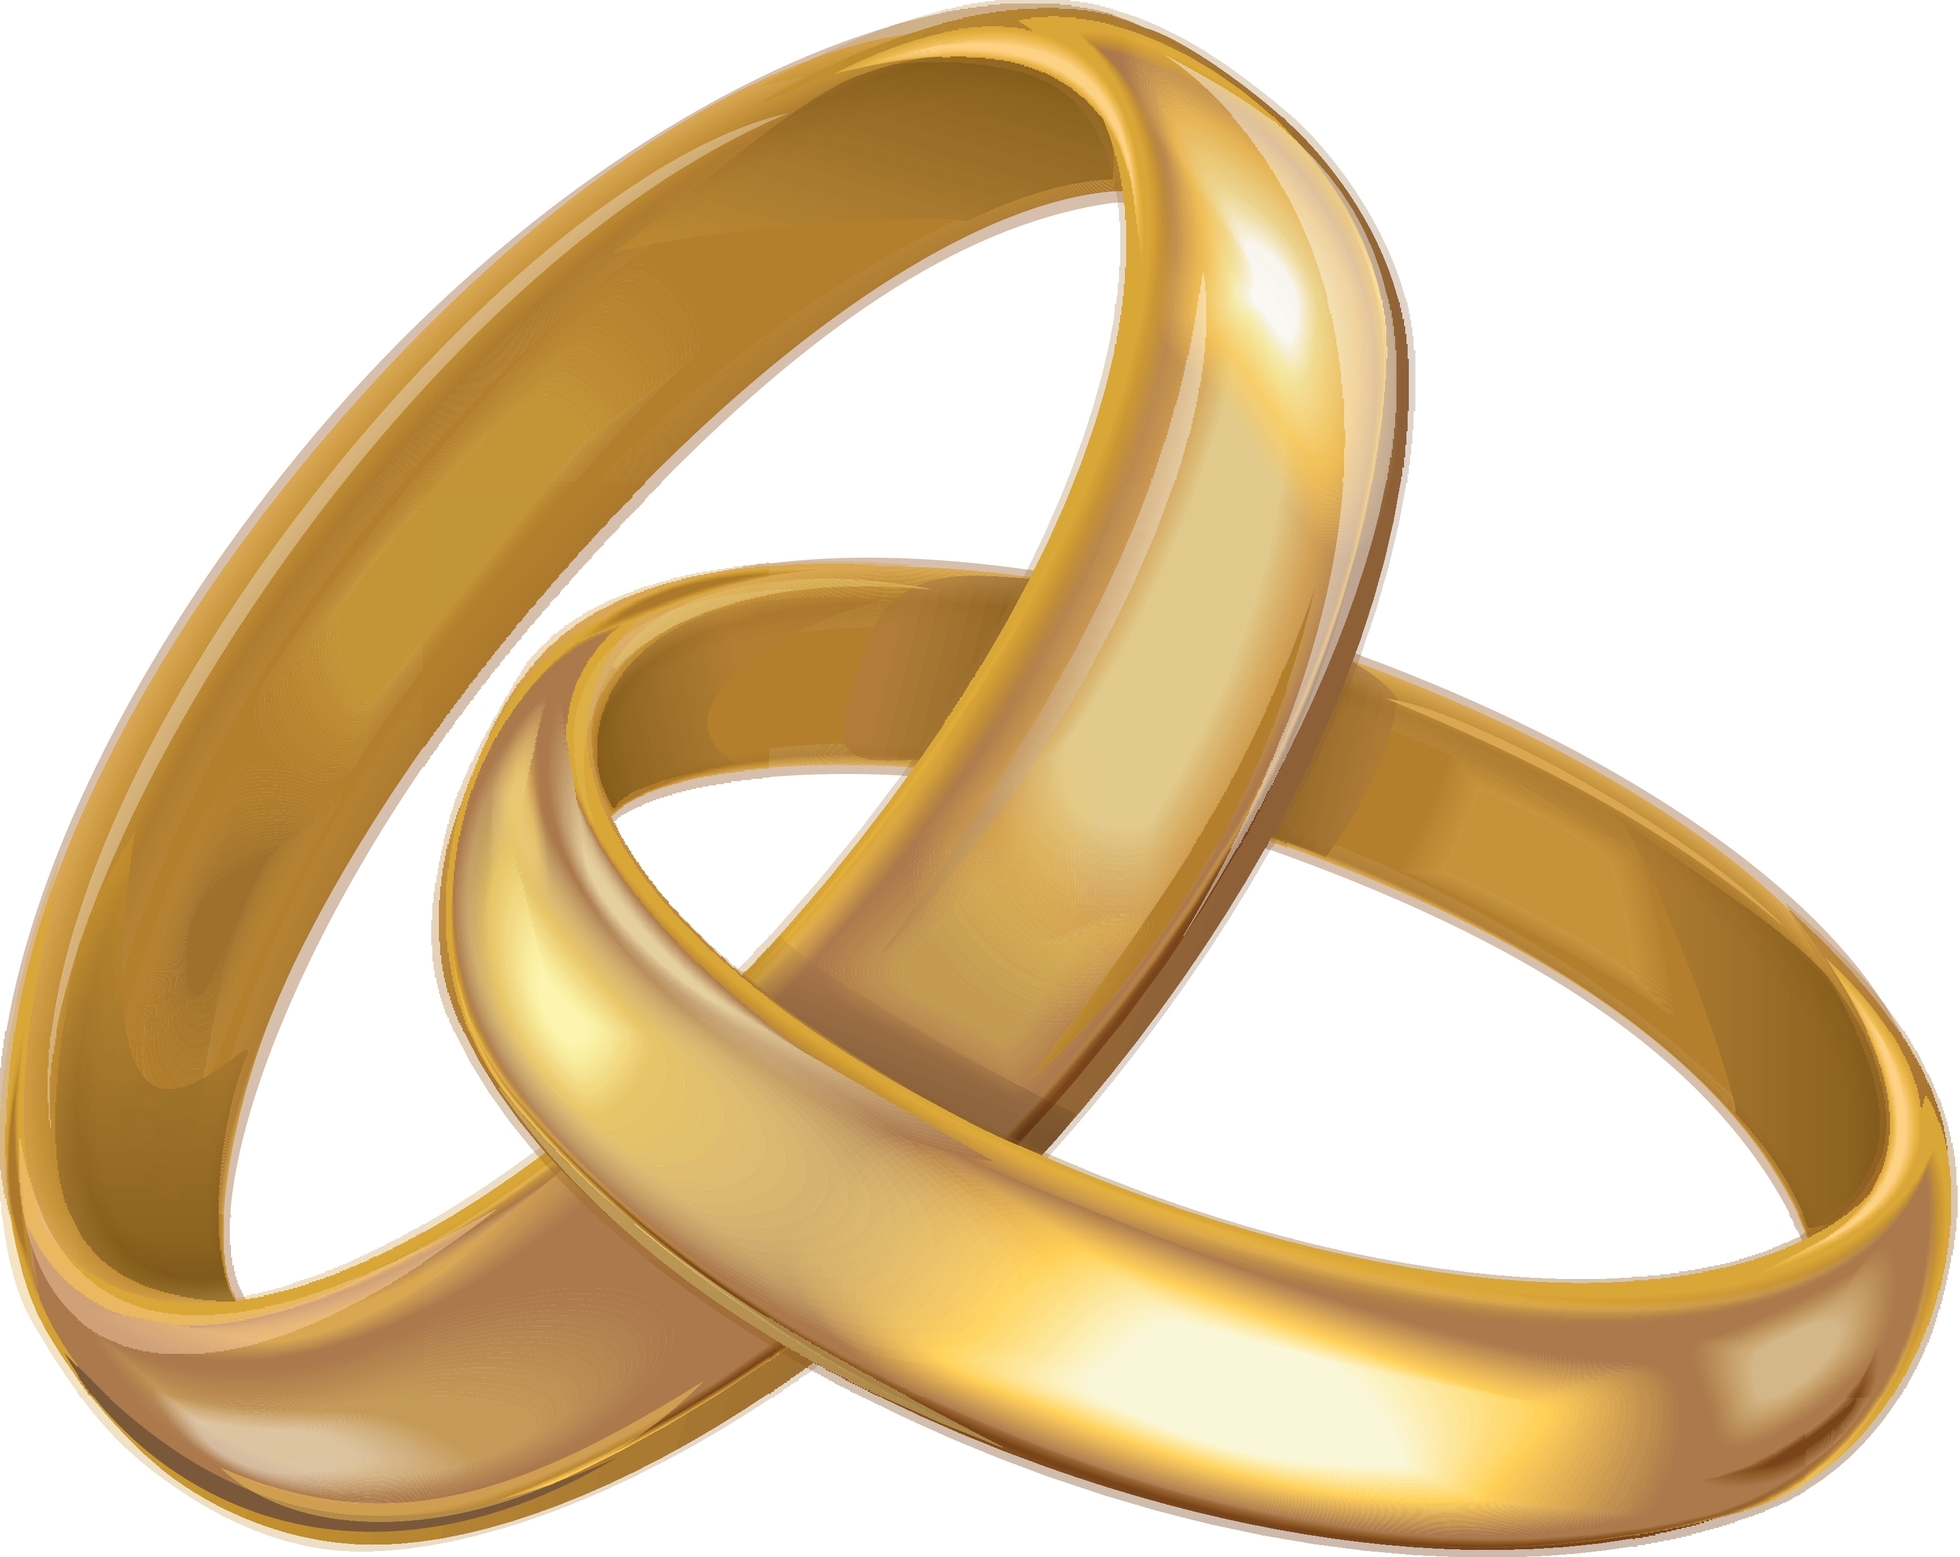 Wedding rings pictures free wedding ring clipart image